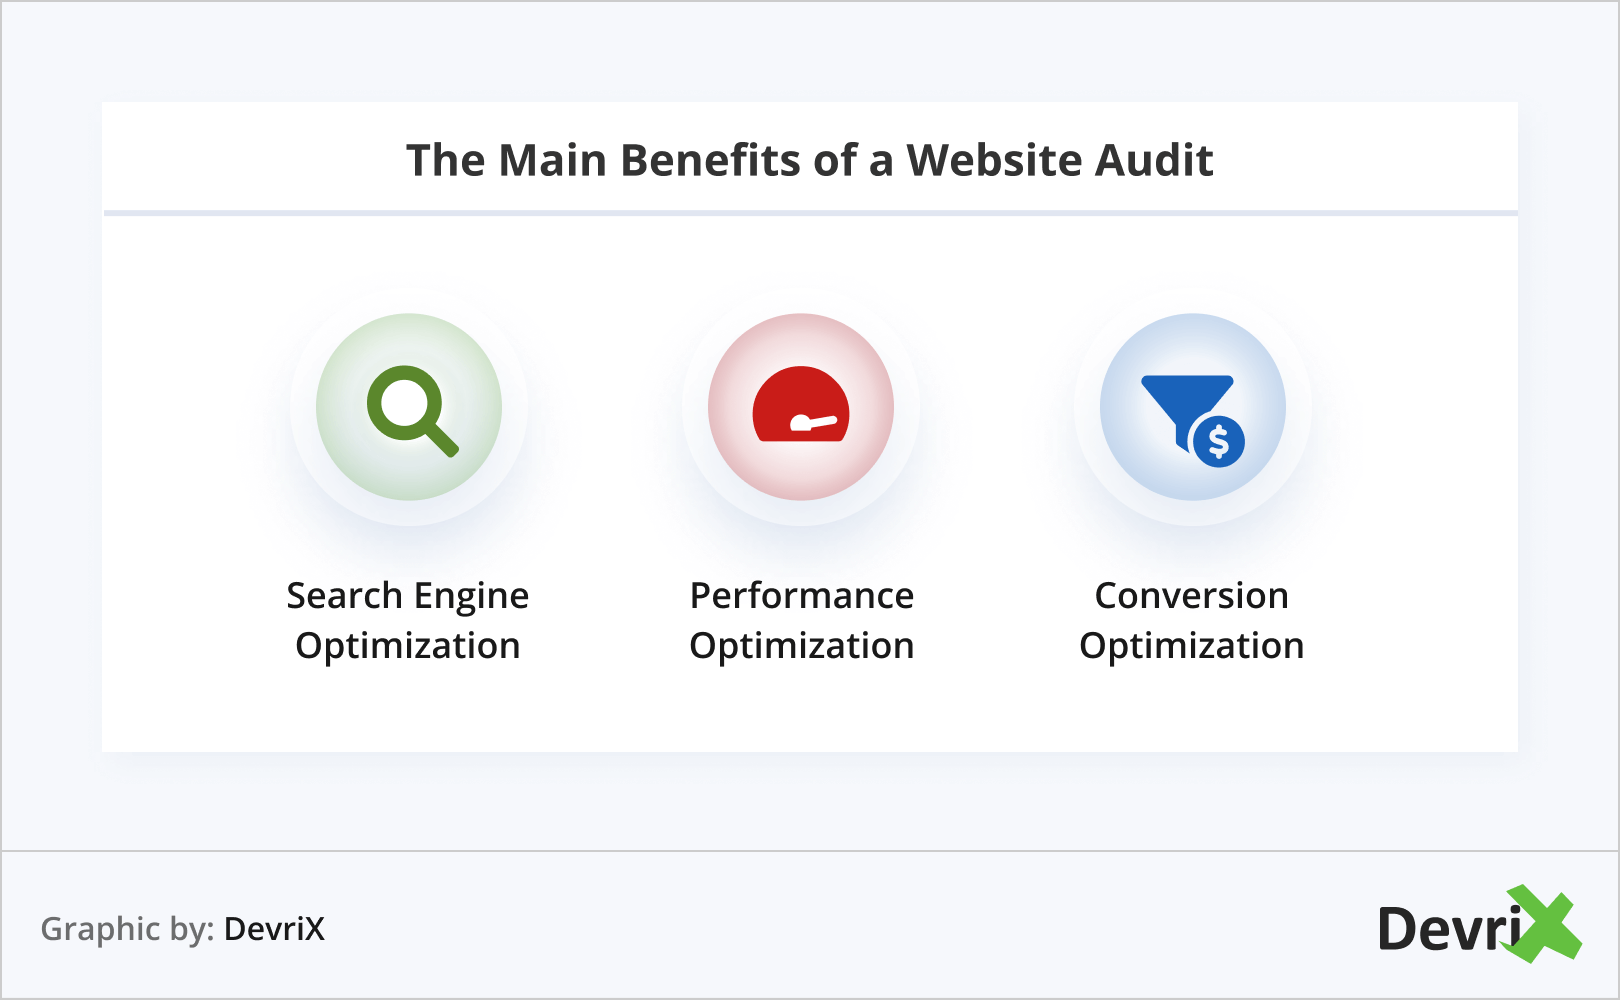 The Main Benefits of a Website Audit